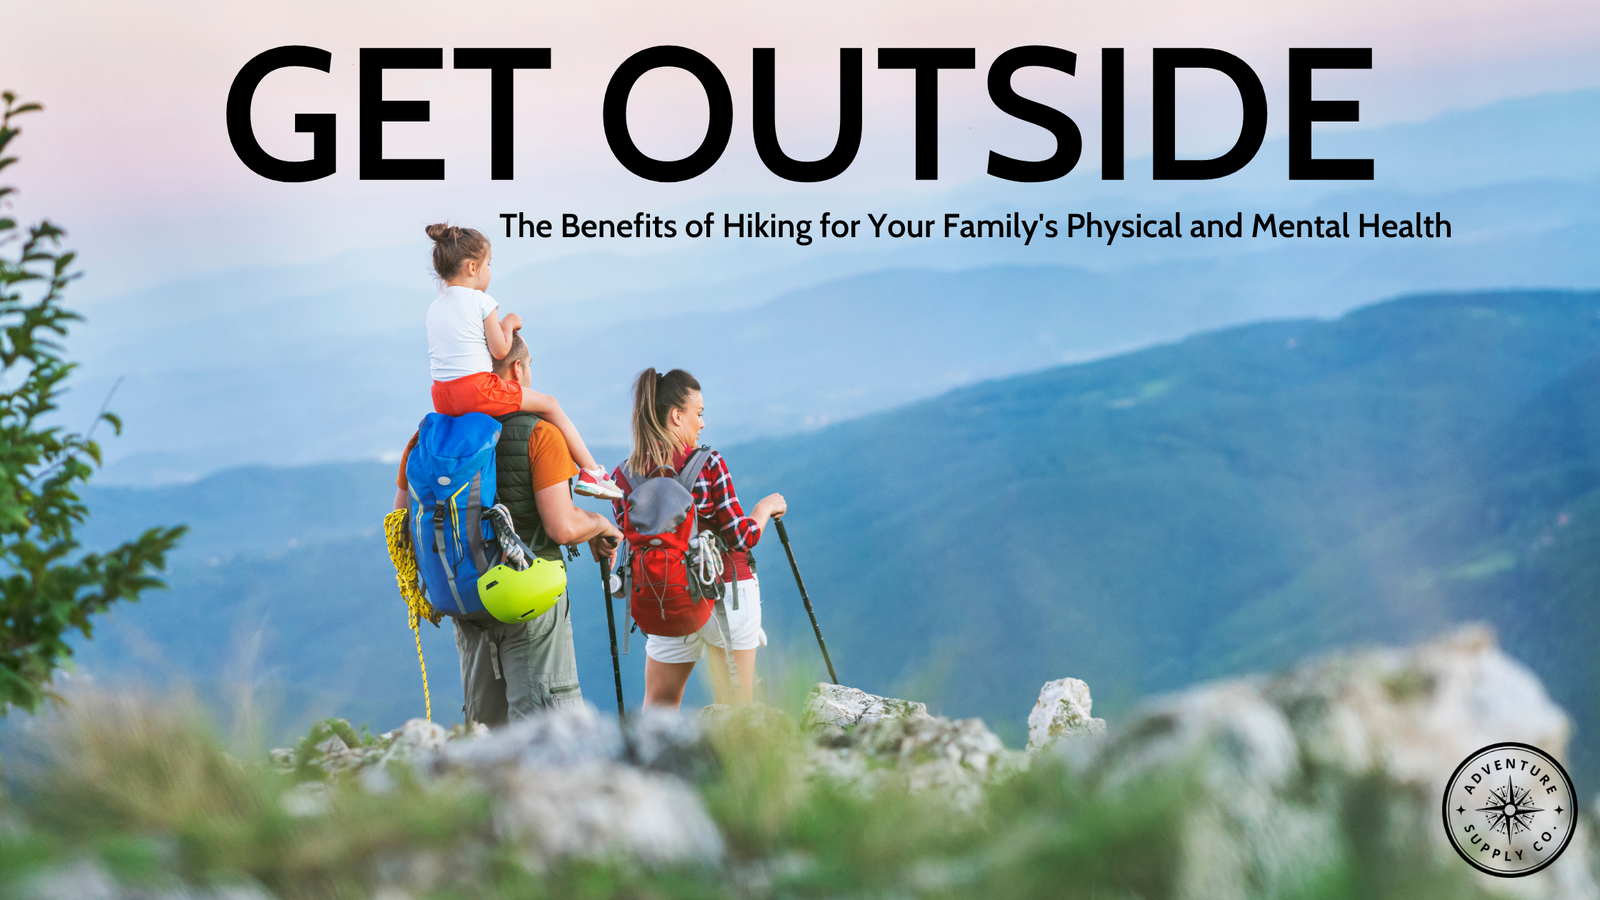 The Benefits of Hiking for Your Family's Physical and Mental Health